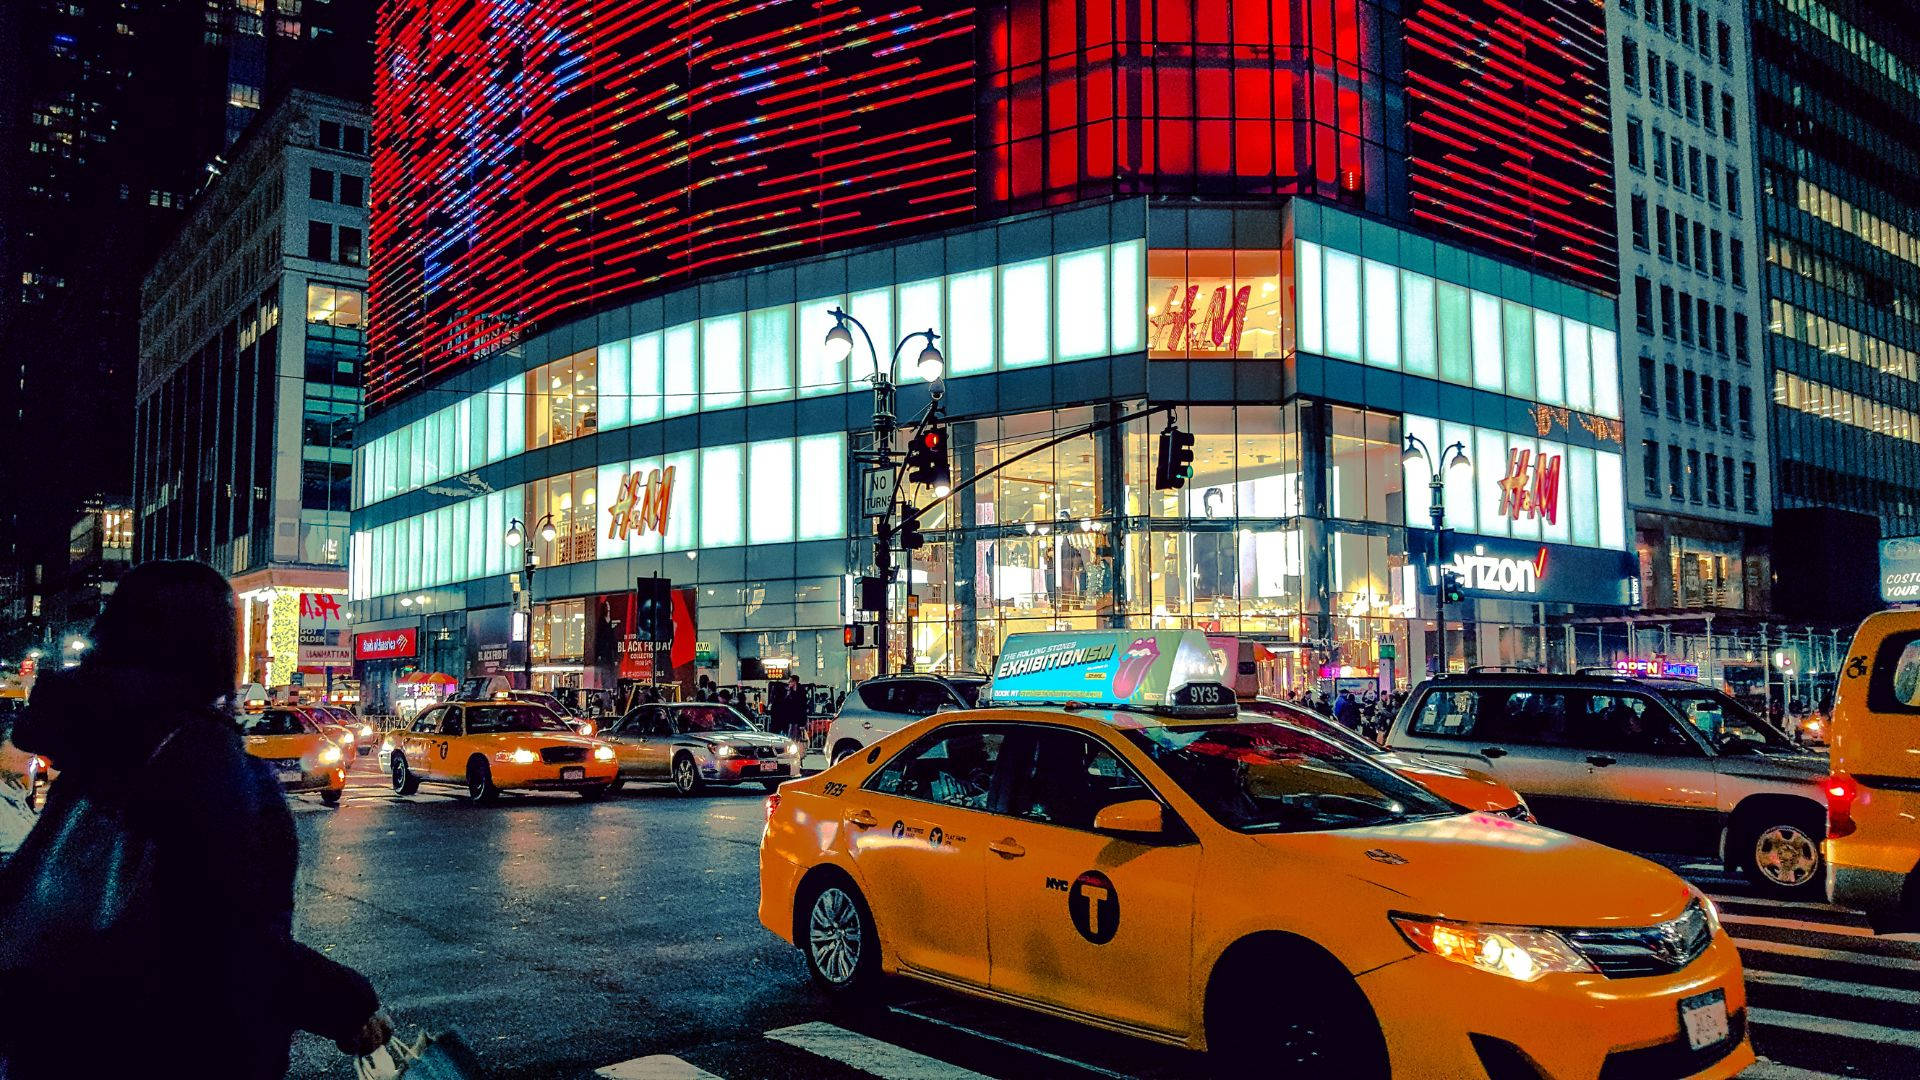 Taxi Against H&m Store At Night Background